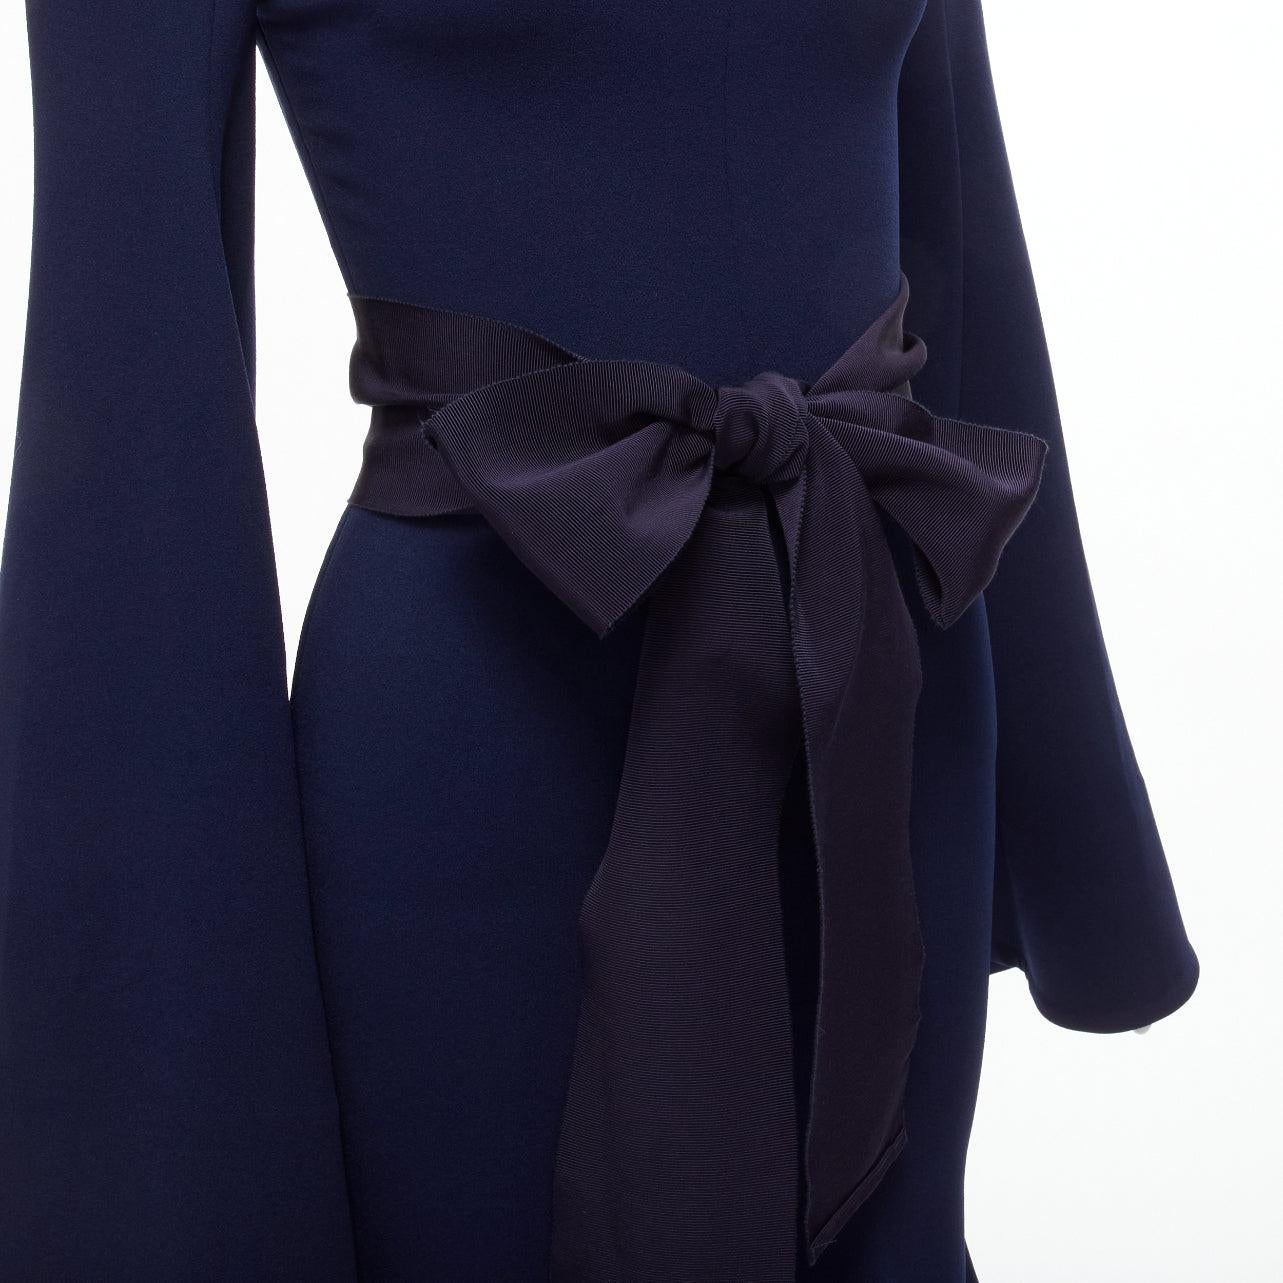 SOLACE LONDON Haso navy blue asymmetric stretch crepe bell sleeves belted dress UK4 XXS
Reference: BSHW/A00022
Brand: Solace London
Material: Polyester, Blend
Color: Navy
Pattern: Solid
Closure: Zip
Lining: Blue Fabric
Extra Details: Side zip. Hem